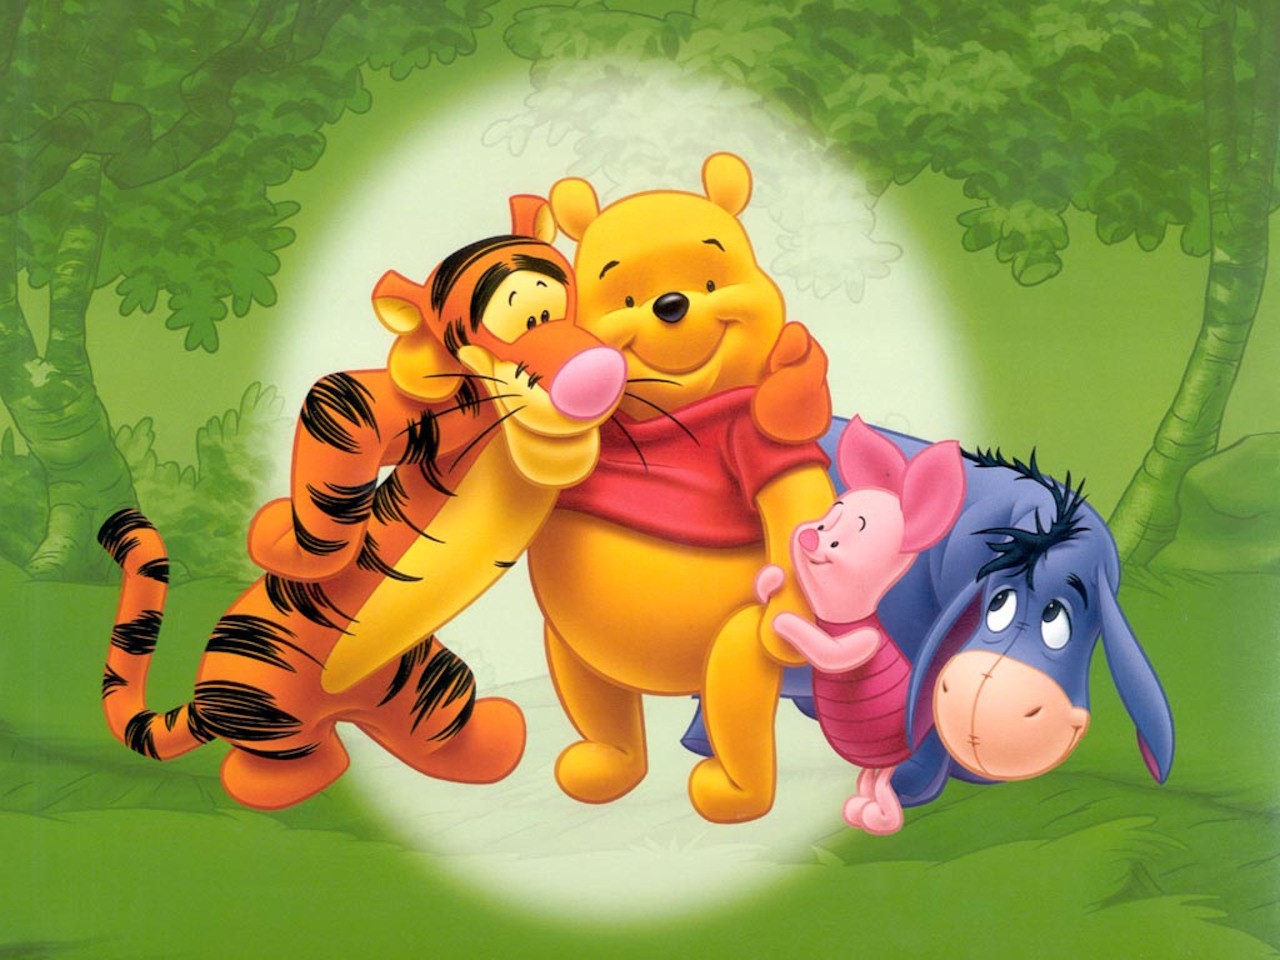 Winnie The Pooh Wallpaper Pictures Gallery